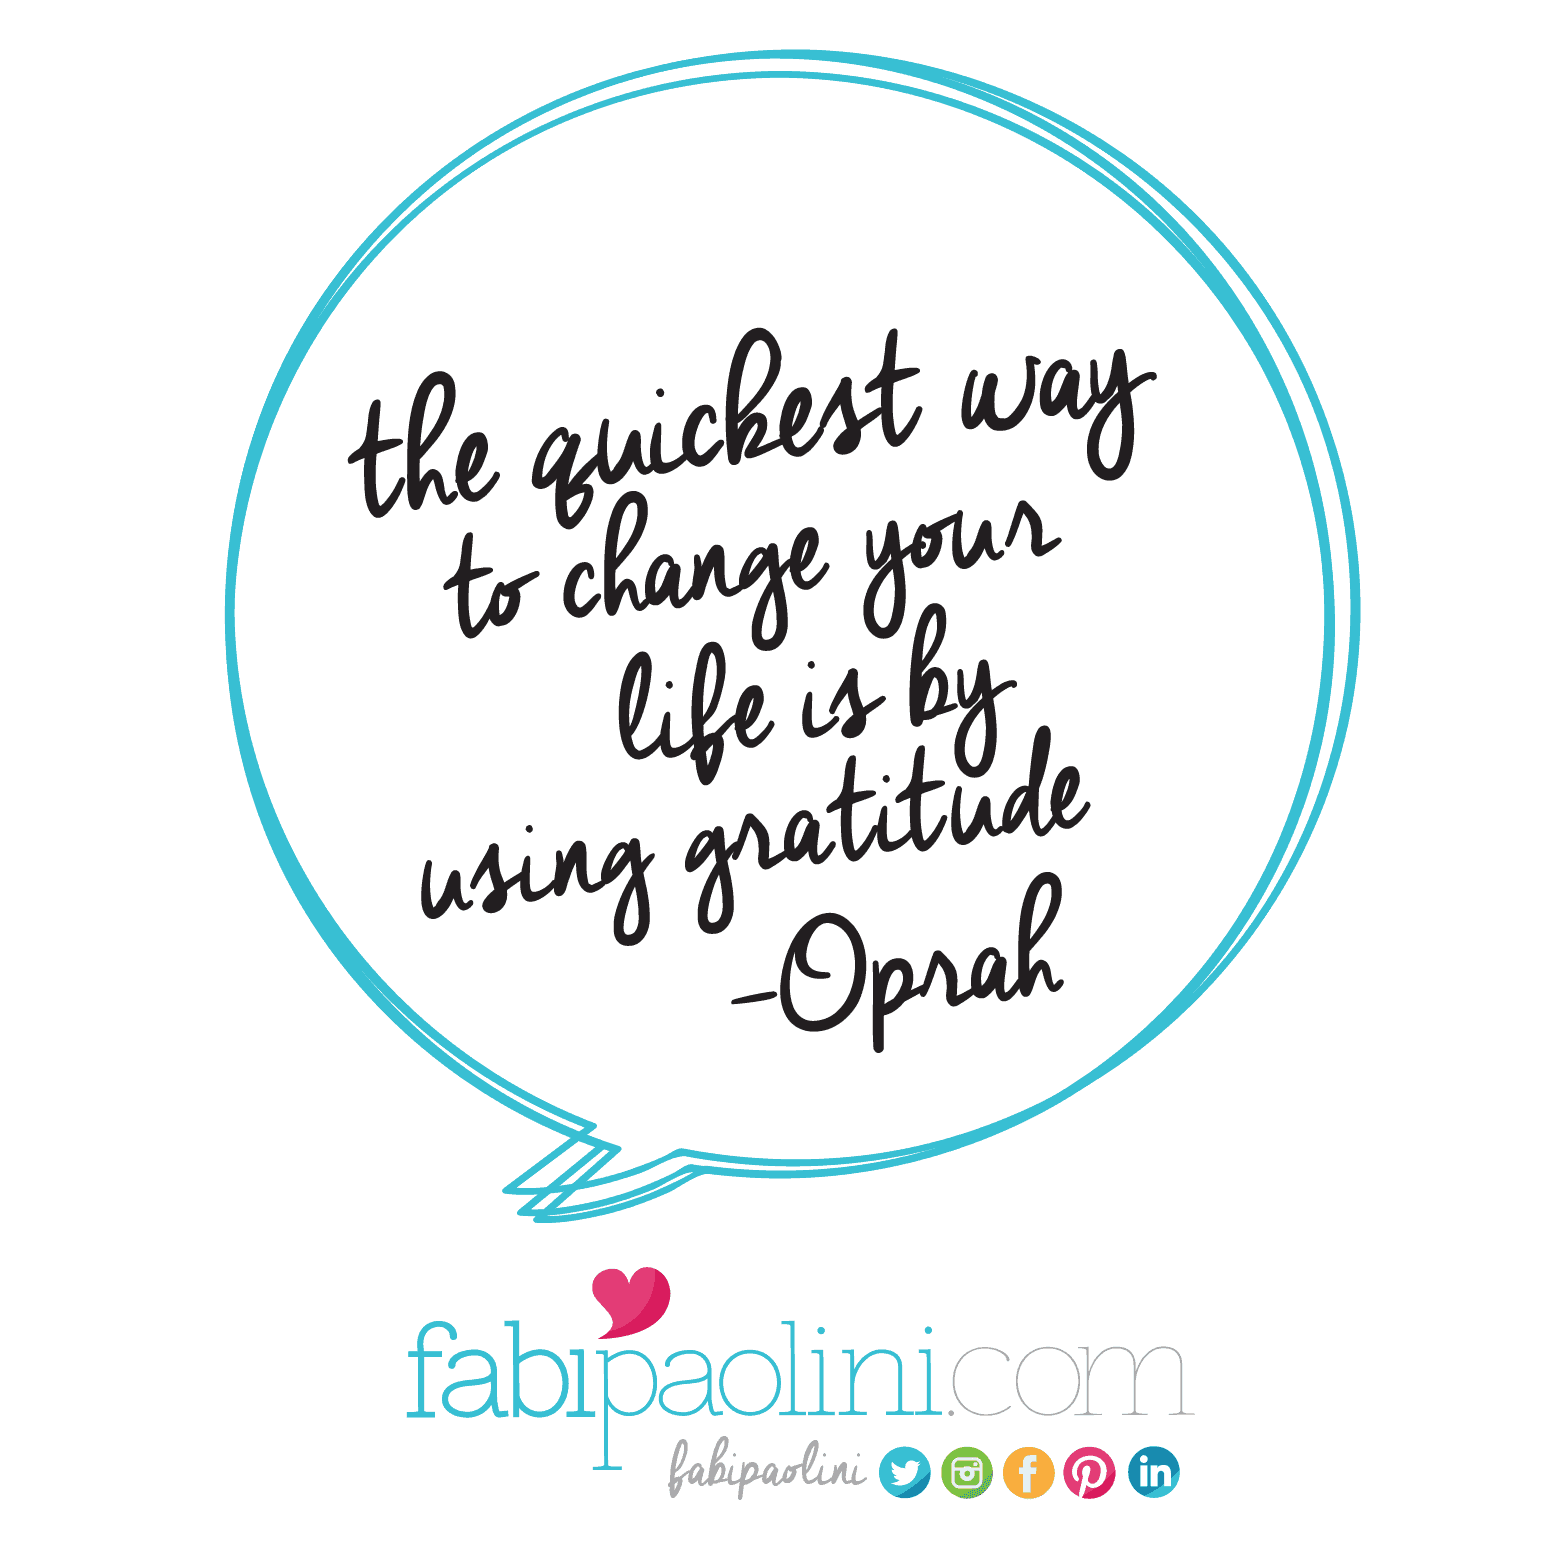 the quickest way to change your life is by using gratitude. Oprah. Quotes + inspiration